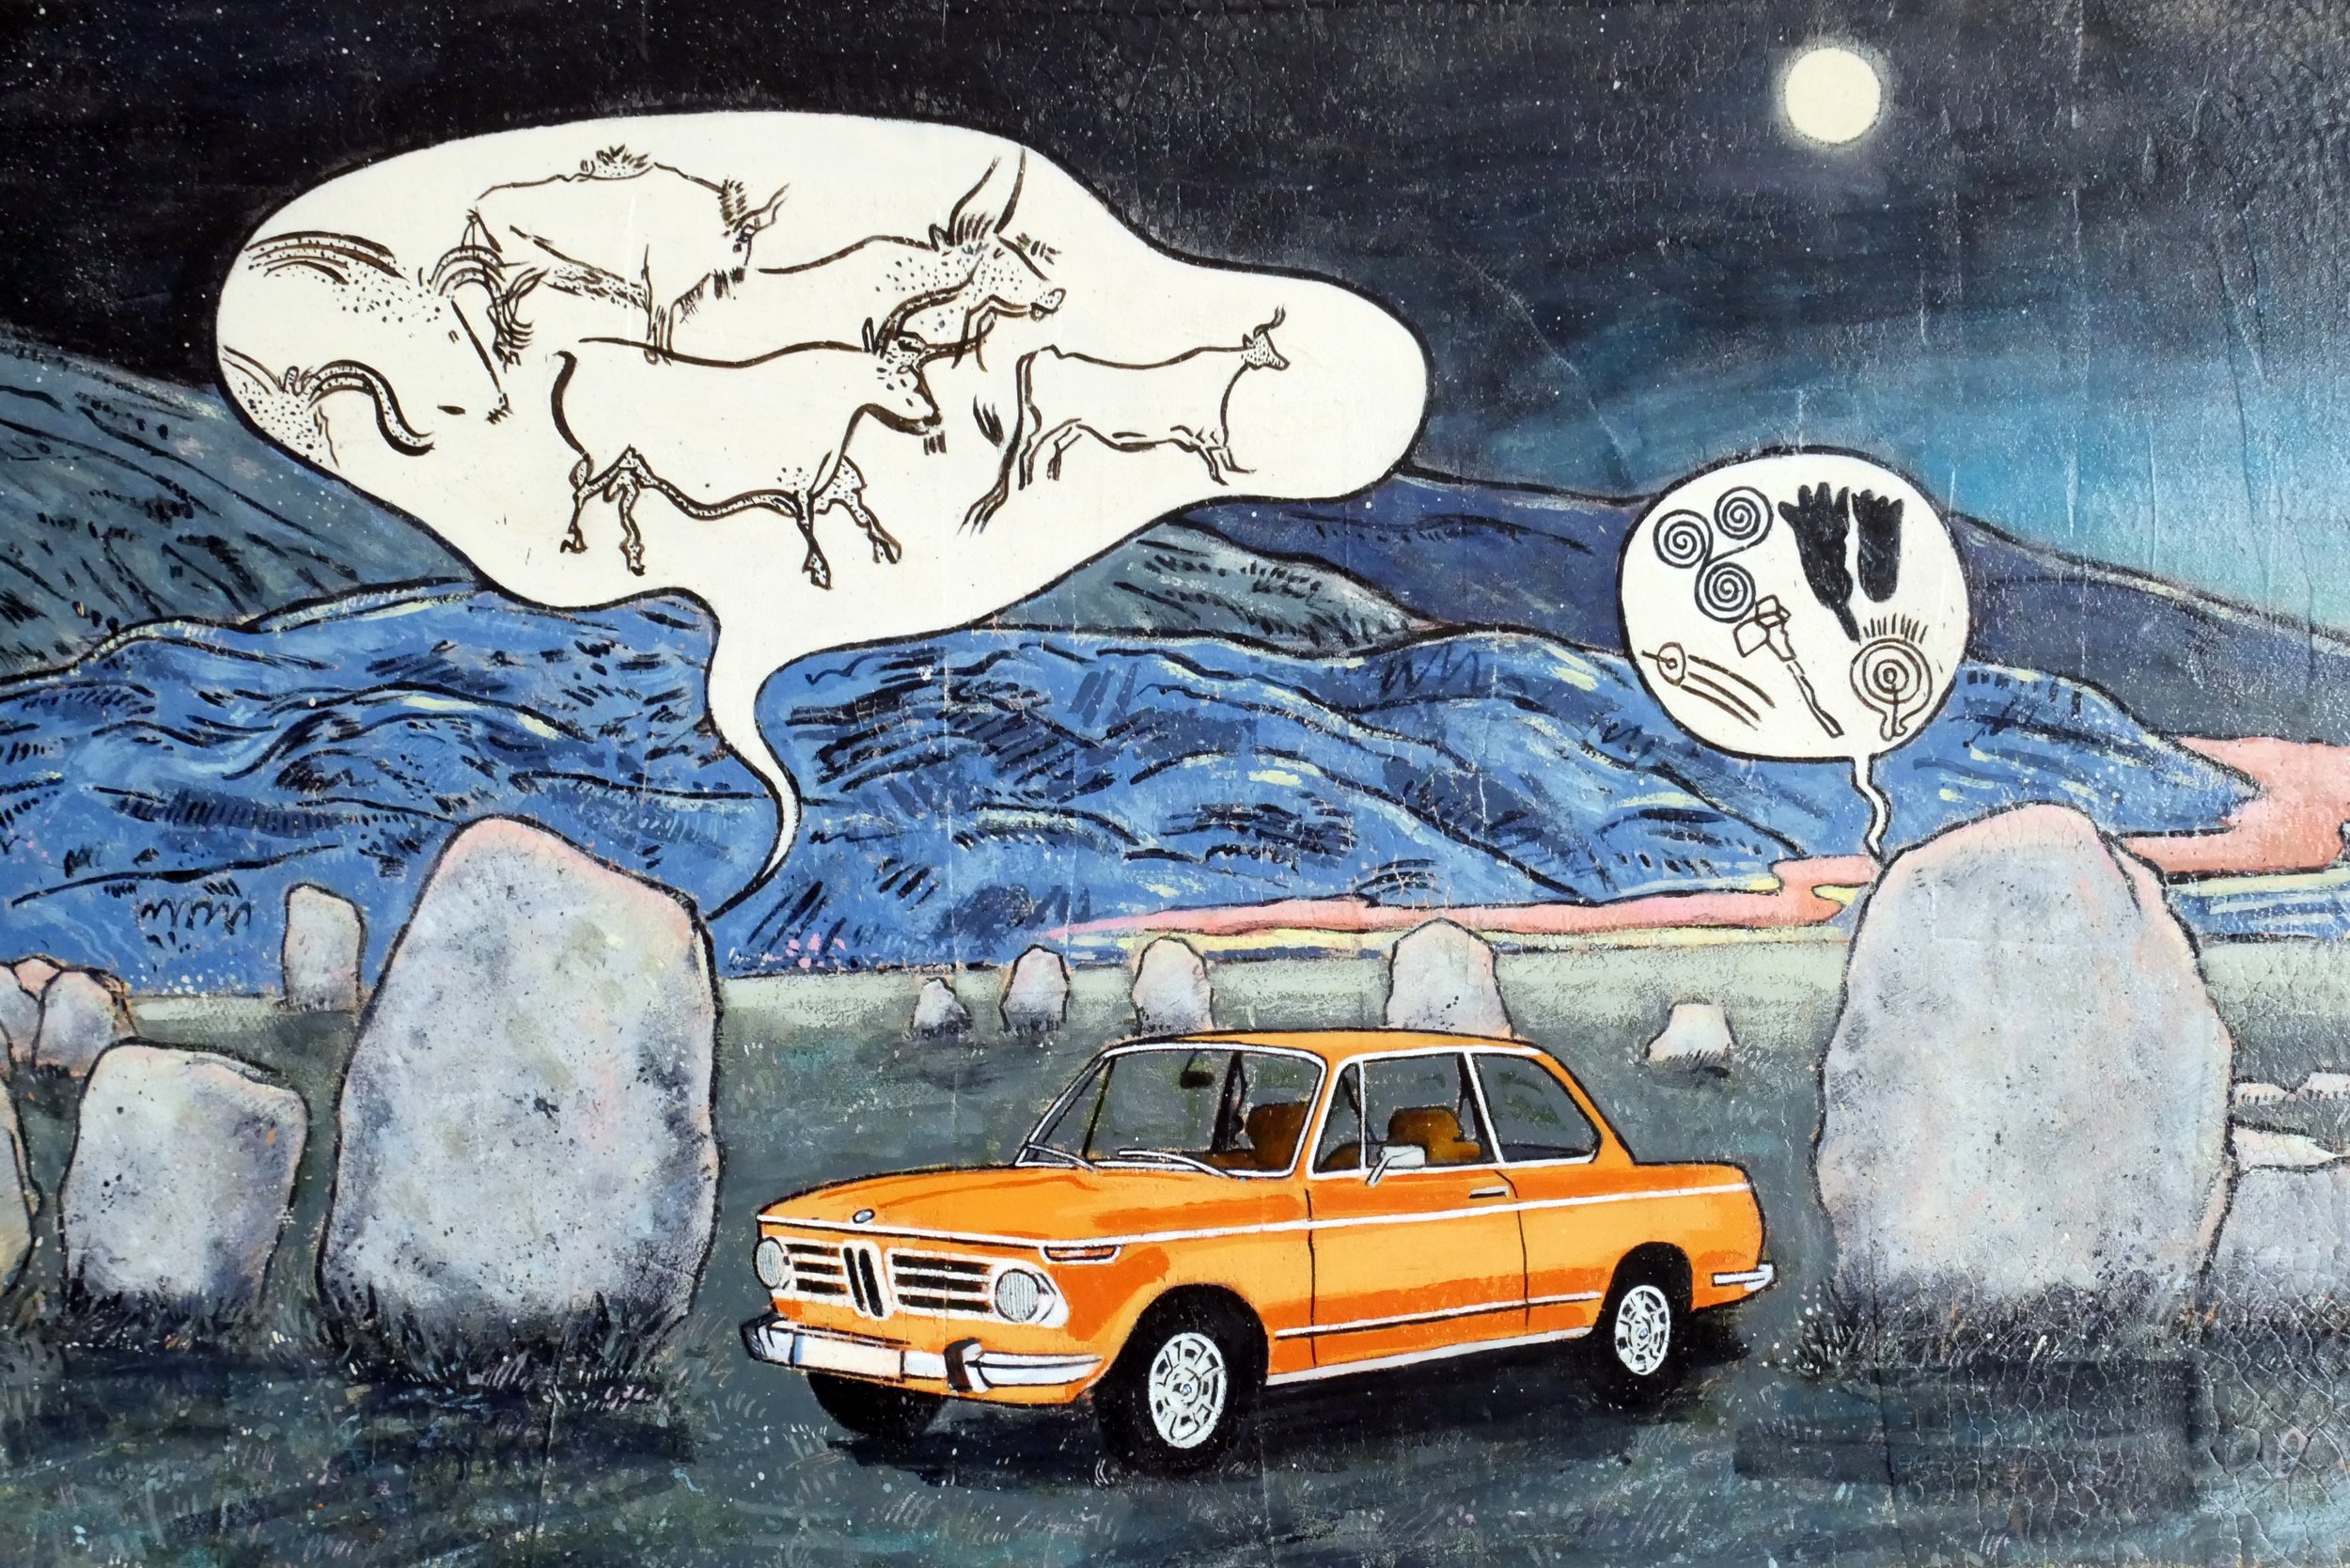 Castlerigg Stone Circle Clarifies the Context for the BMW 2002